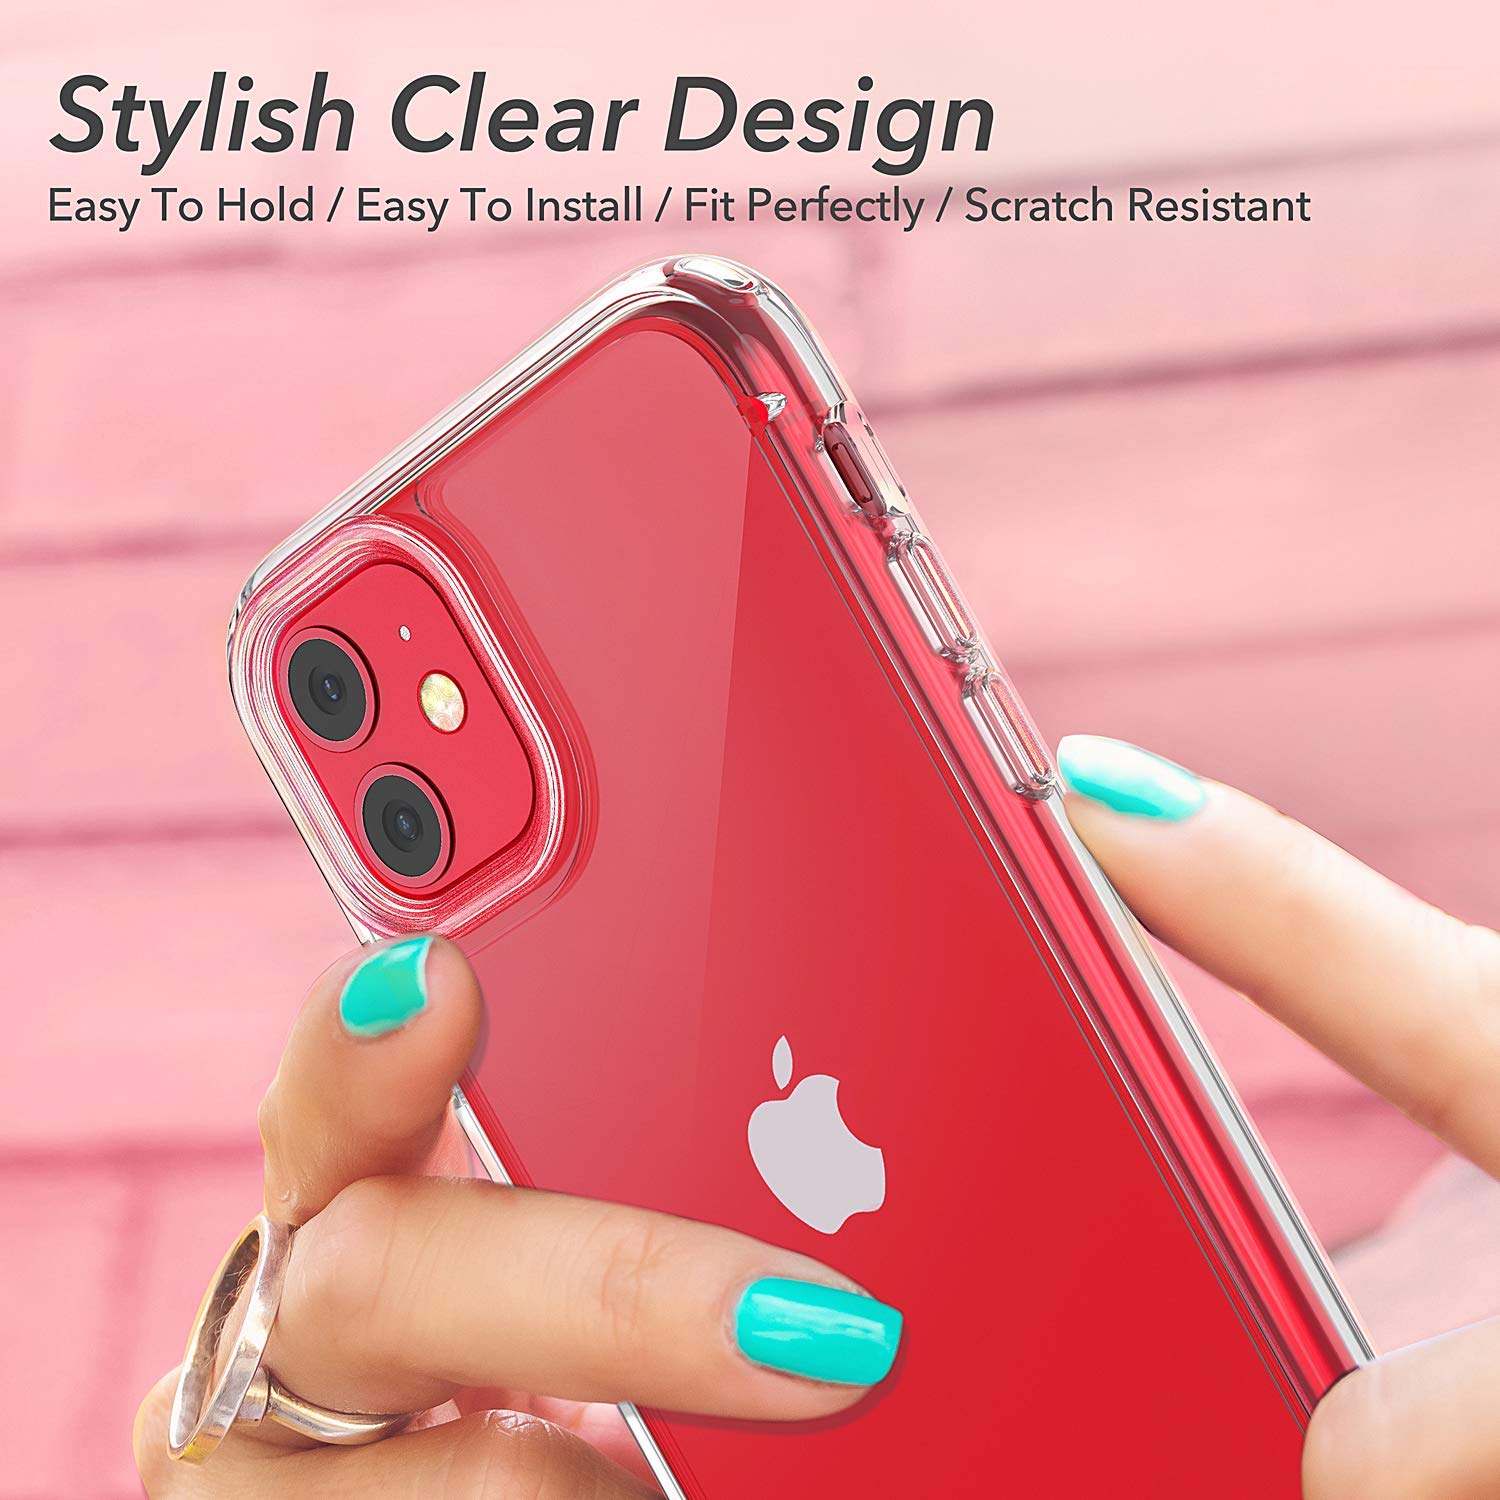 YOUMAKER Compatible with iPhone 11 Case, Clear iPhone 11 Cases Cover for iPhone 11 6.1 Inch